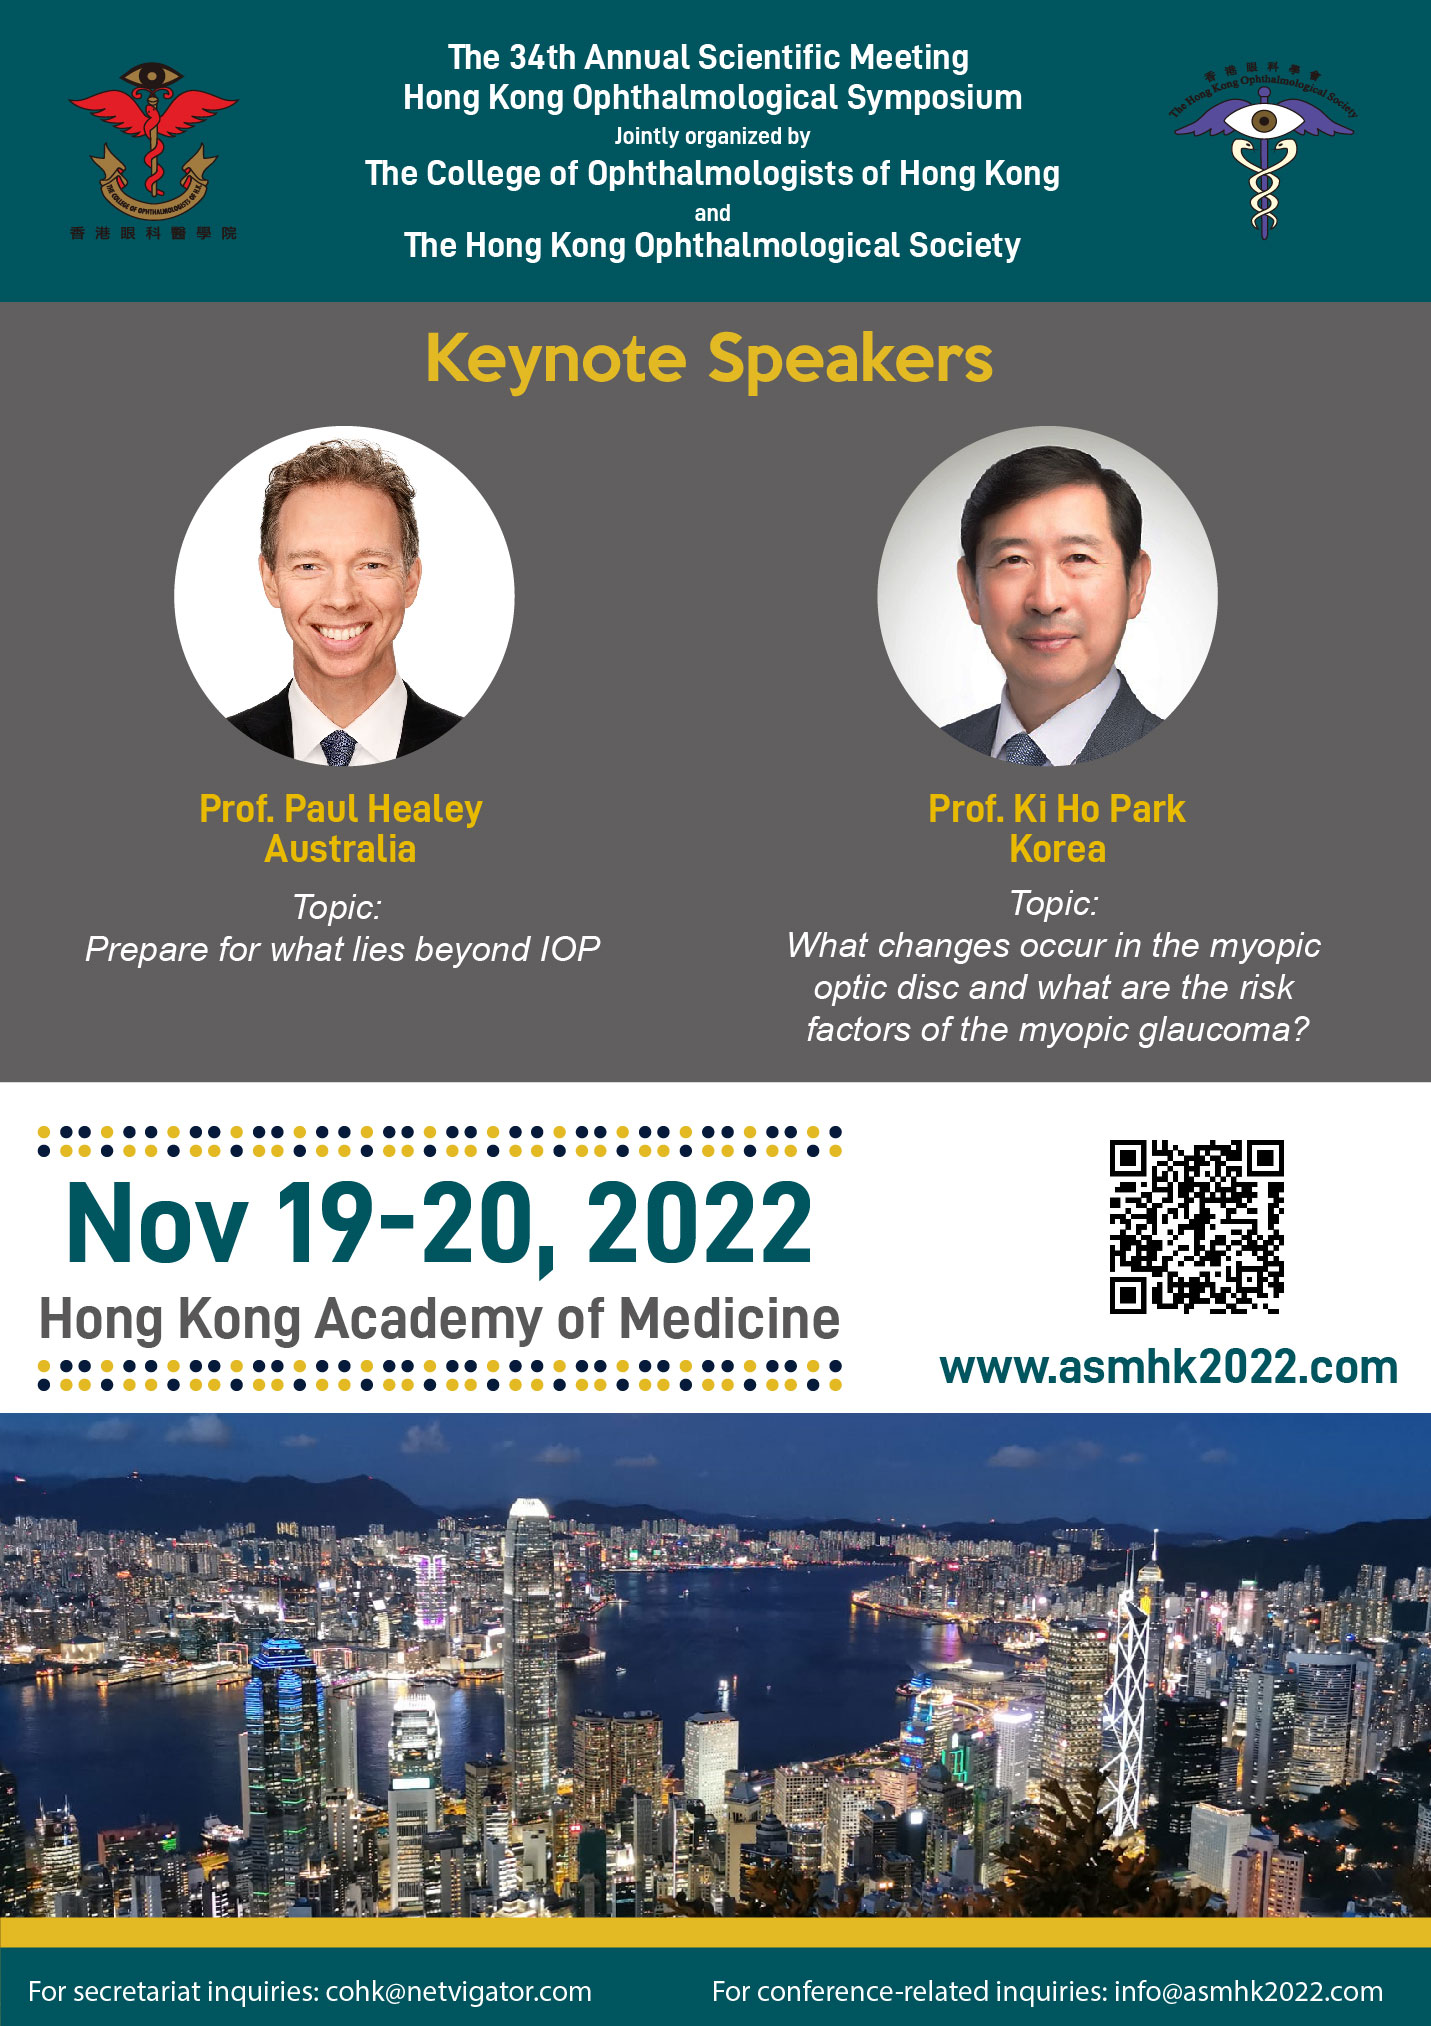 The 34th Annual Scientific Meeting Hong Kong Ophthalmological Symposium